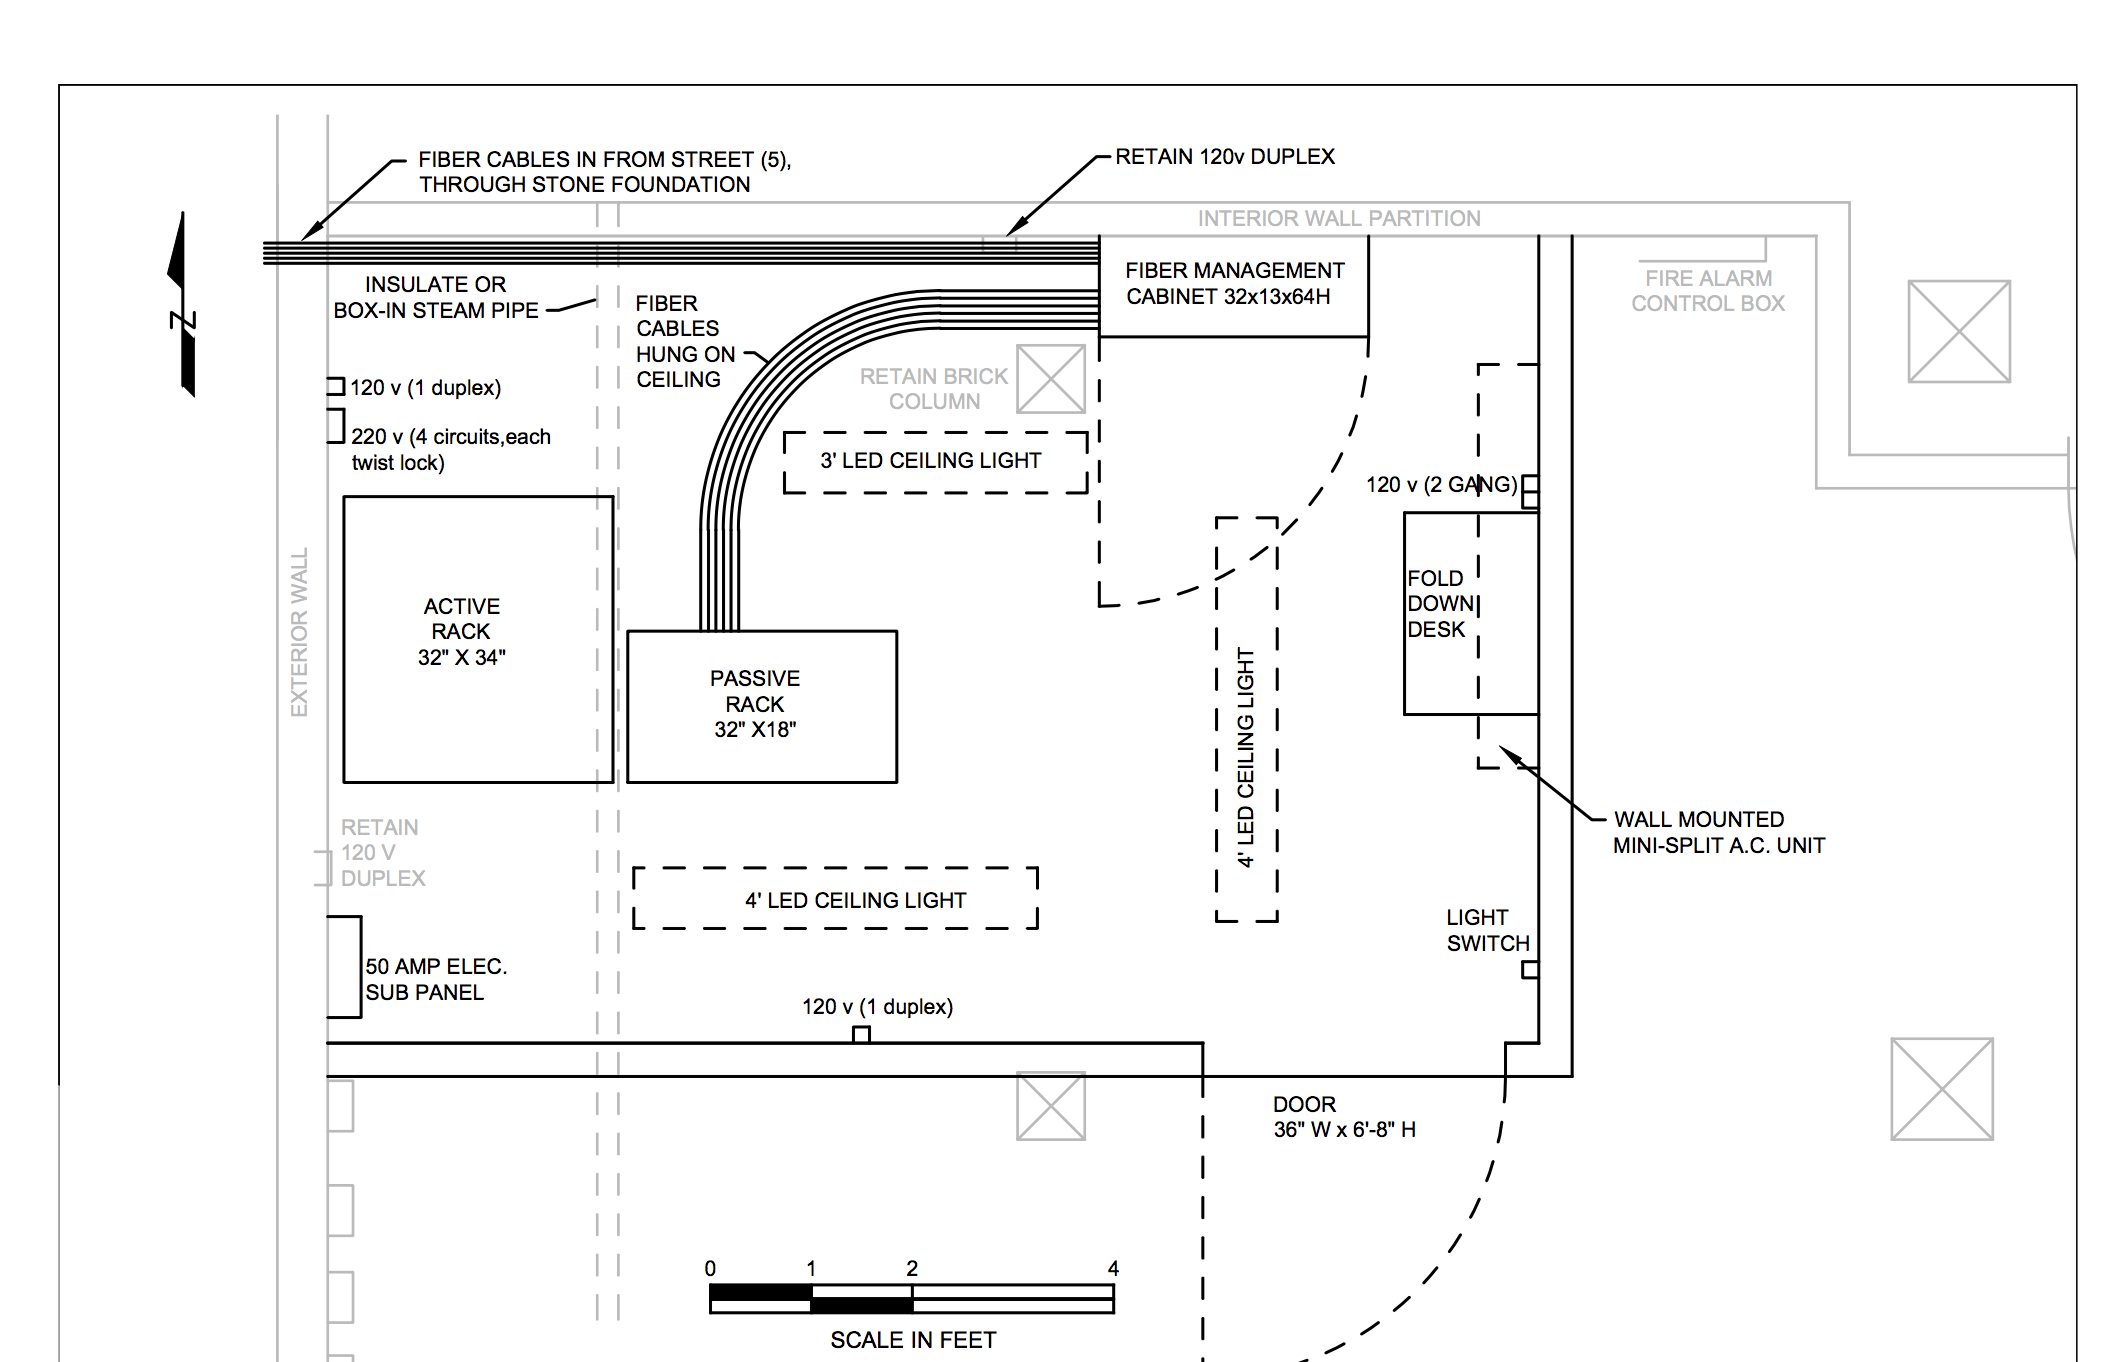 Plan for the network equipment room